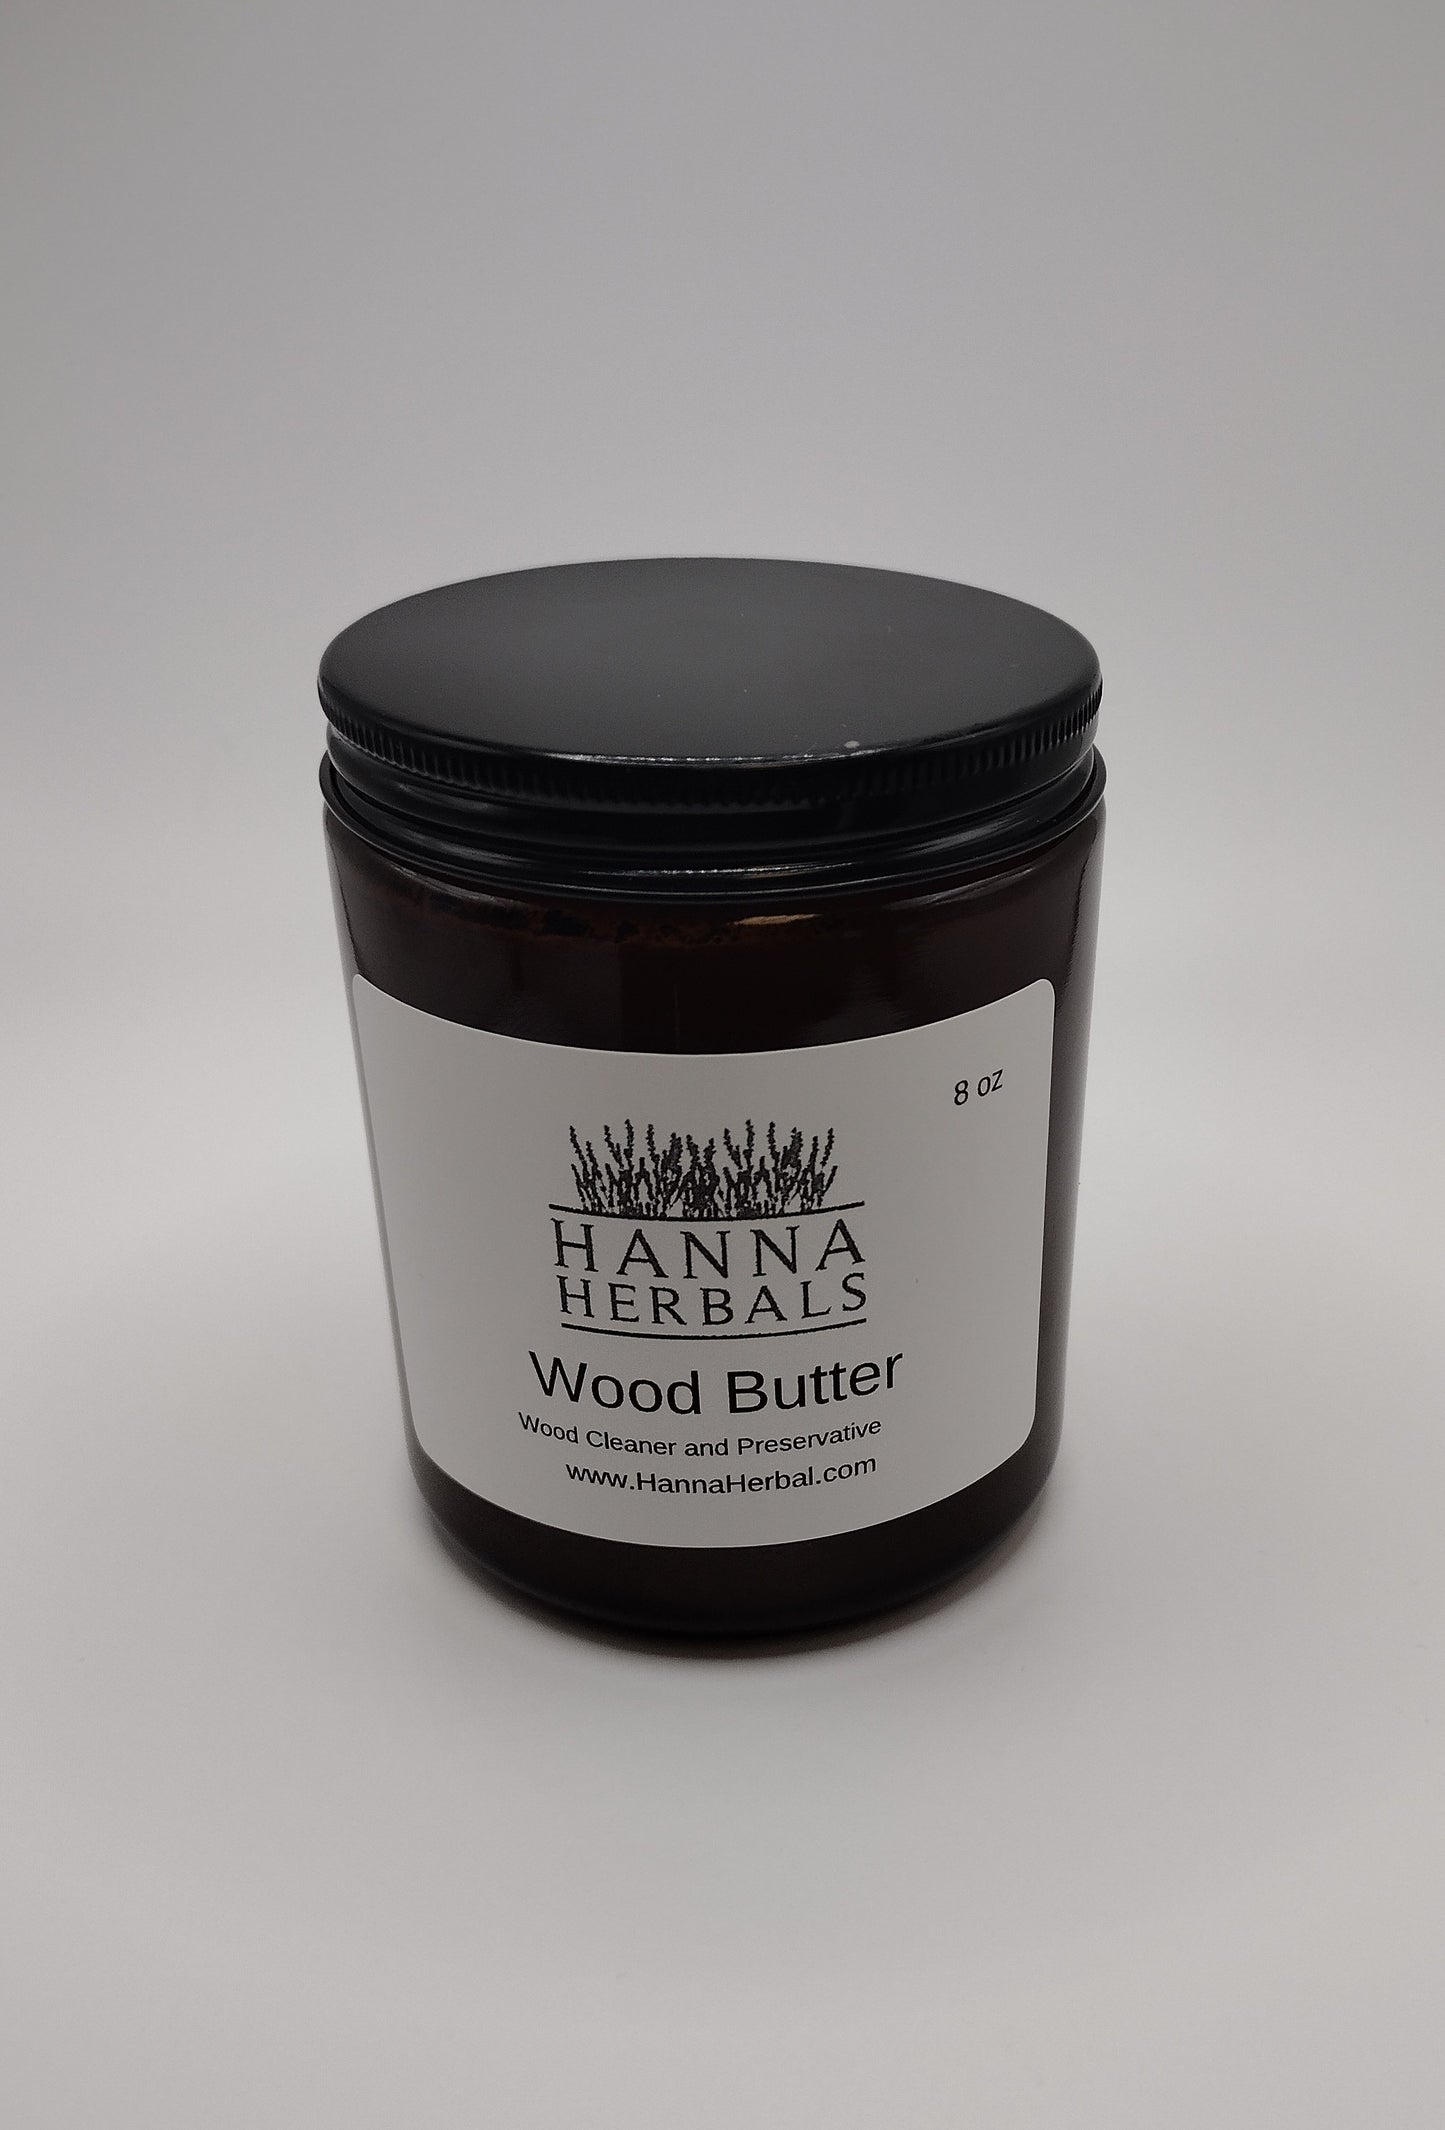 Wood Butter and Preservative